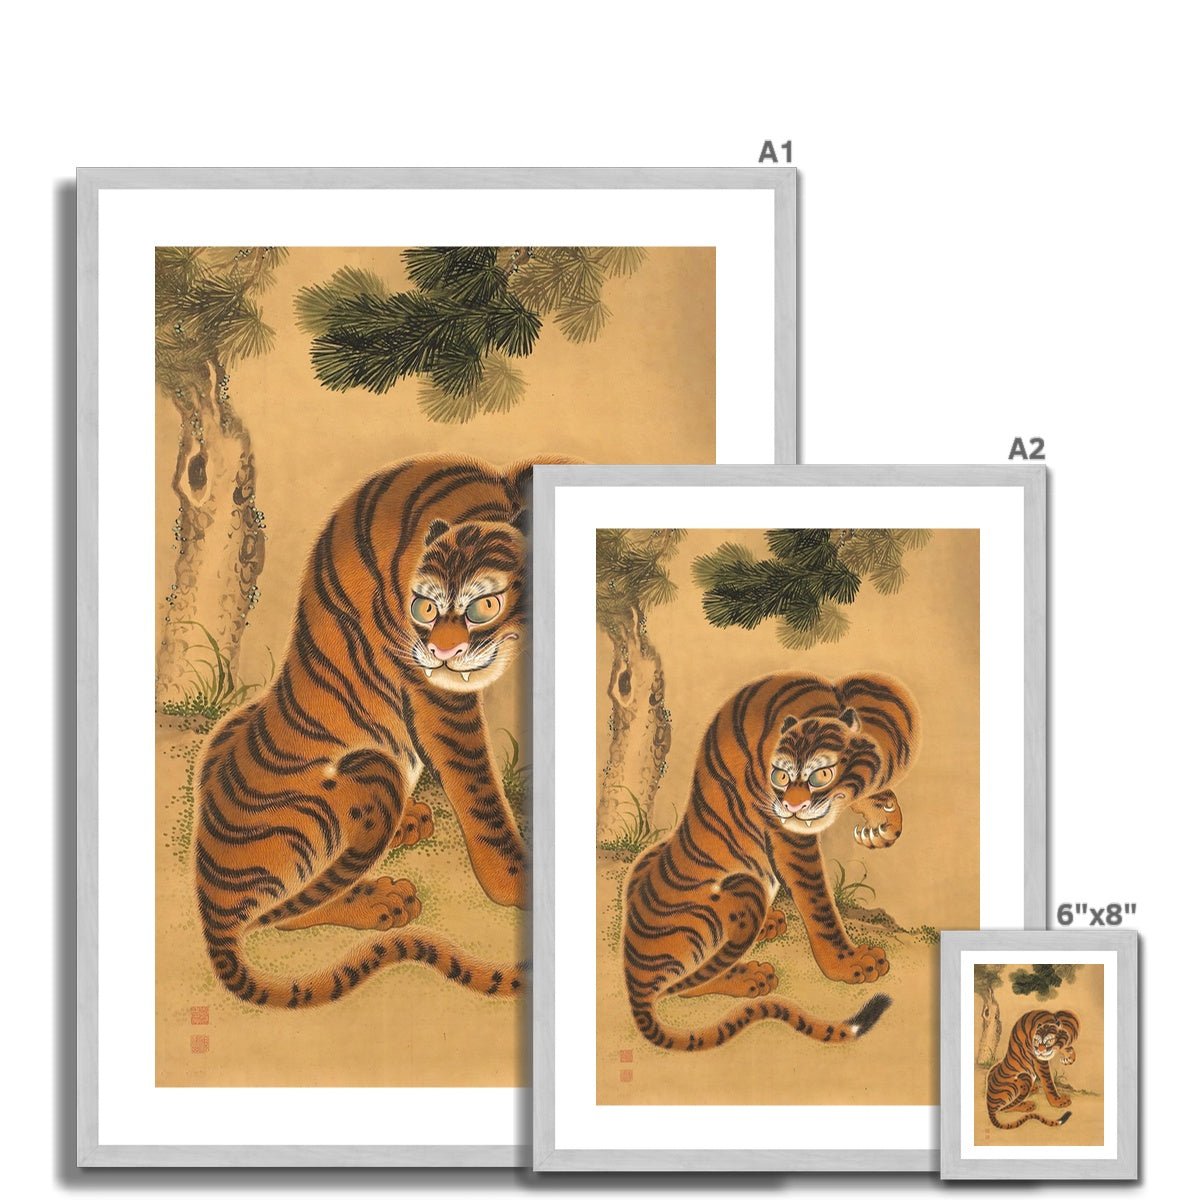 Exquisite Tiger Cleaning its Paw: Japanese Sumi-e Art, Asian Animal Nature Wildlife Jungle Antique Vintage Framed Print - Sacred Surreal